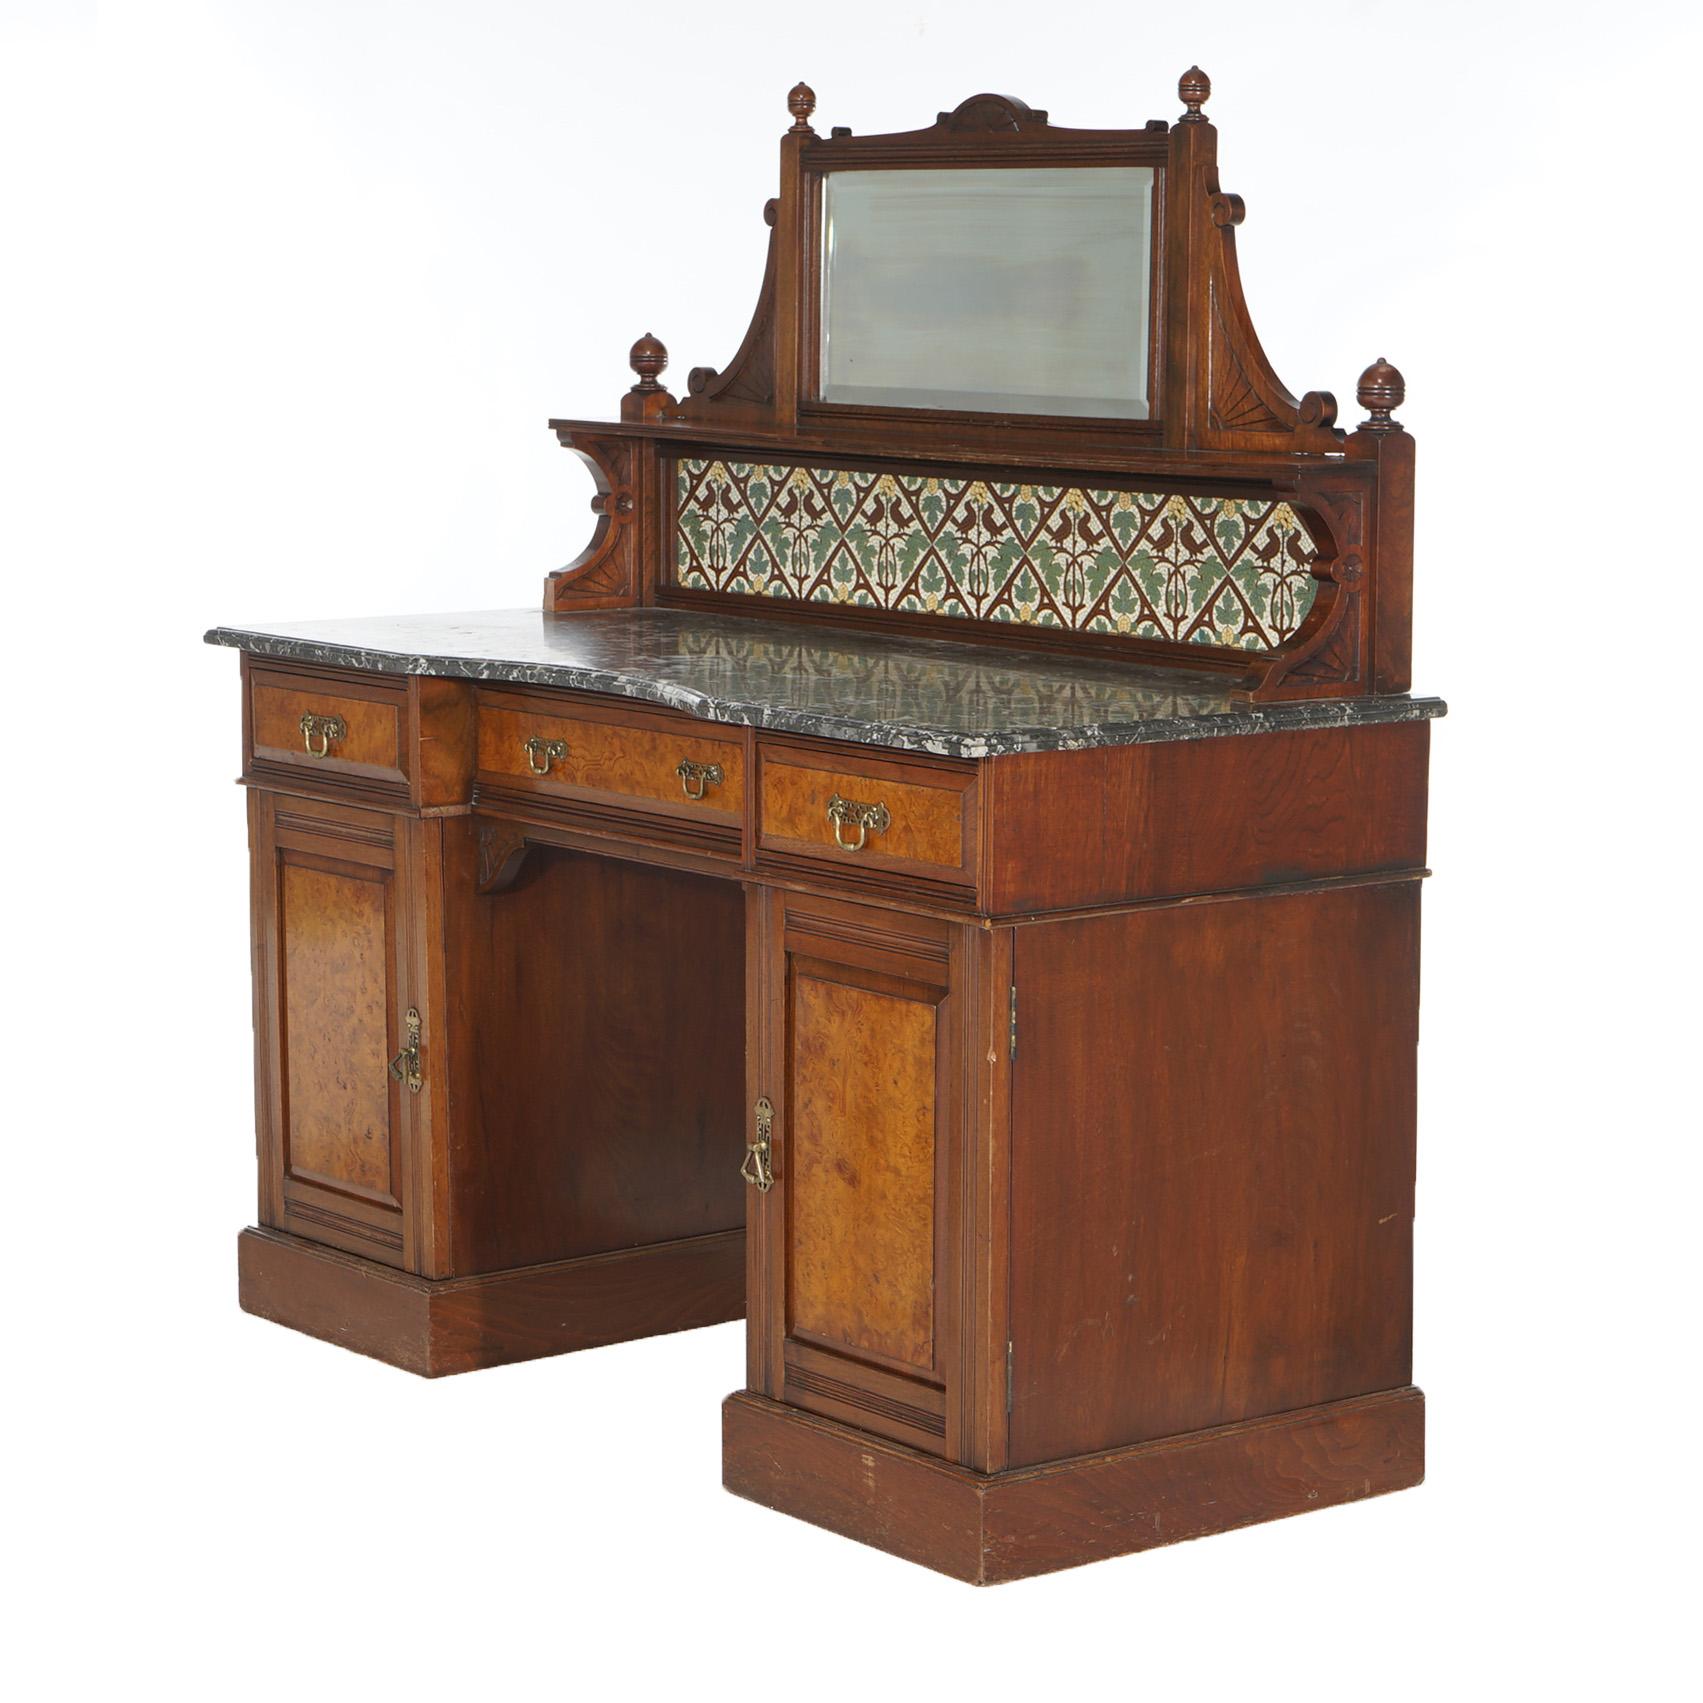 19th Century Antique Aesthetic Walnut & Burl Marble Top Dressing Table with Bird & Leaf Tiles For Sale